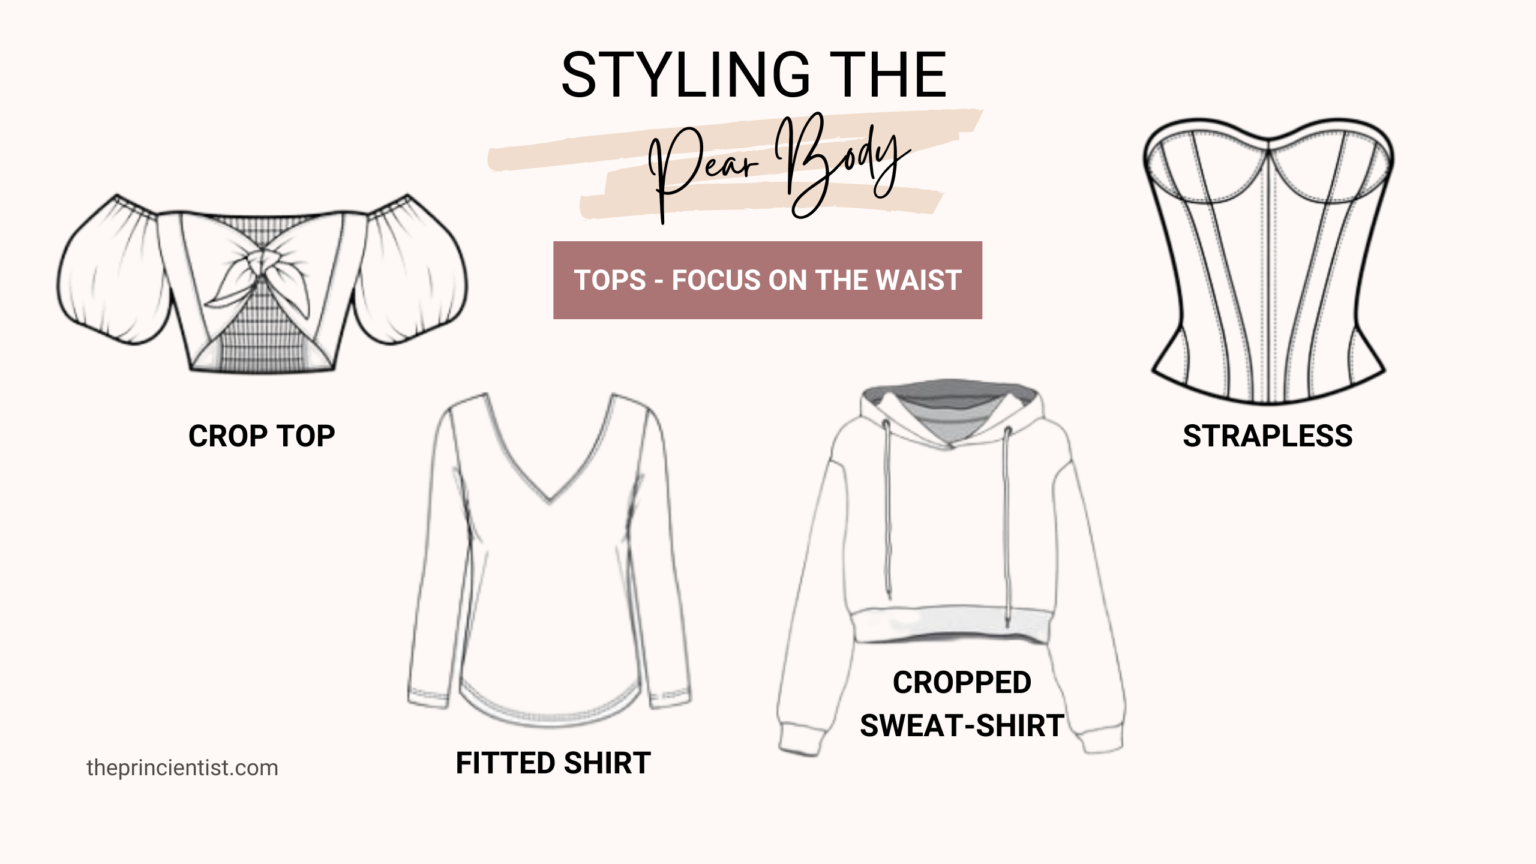 how to dress the pear shaped body - tops for the pear body 3 - focus on the waist